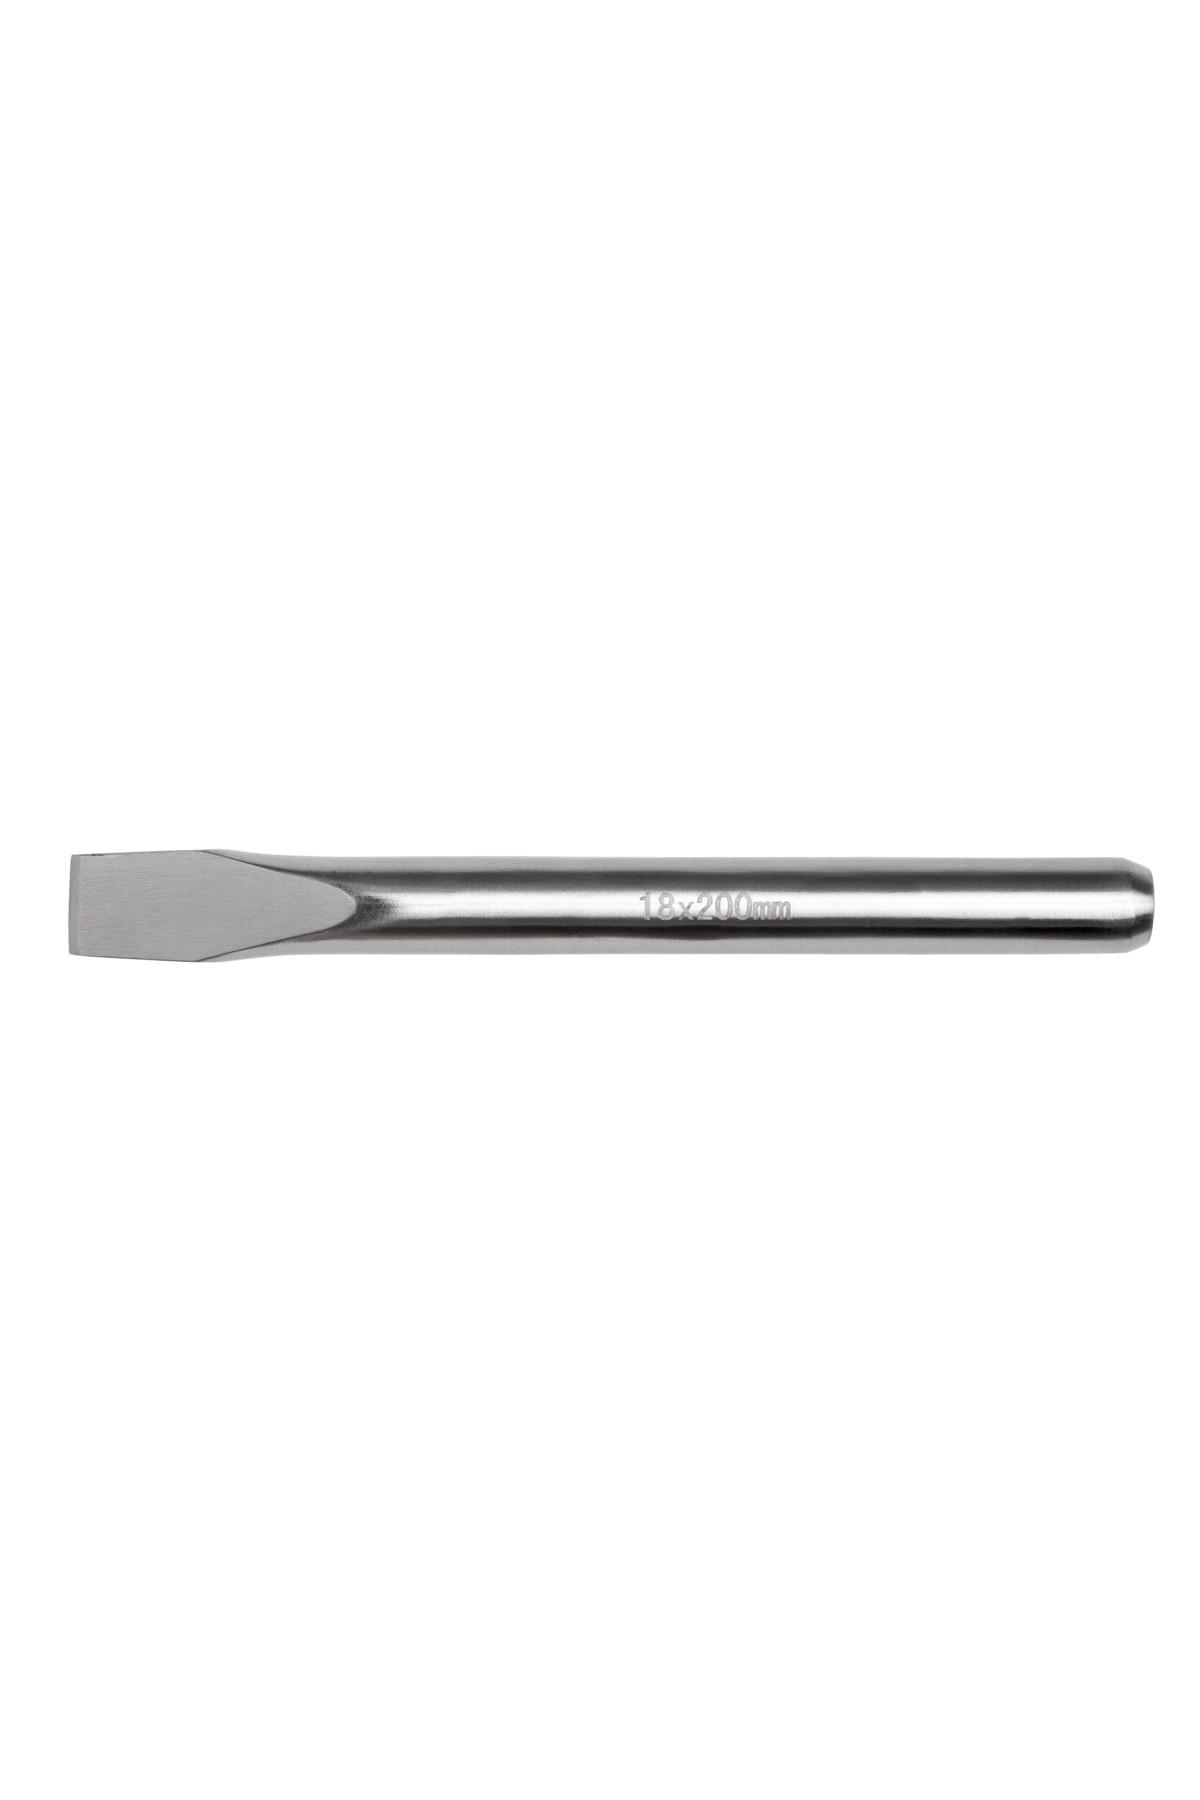 Flat chisel stainless 30-500mm